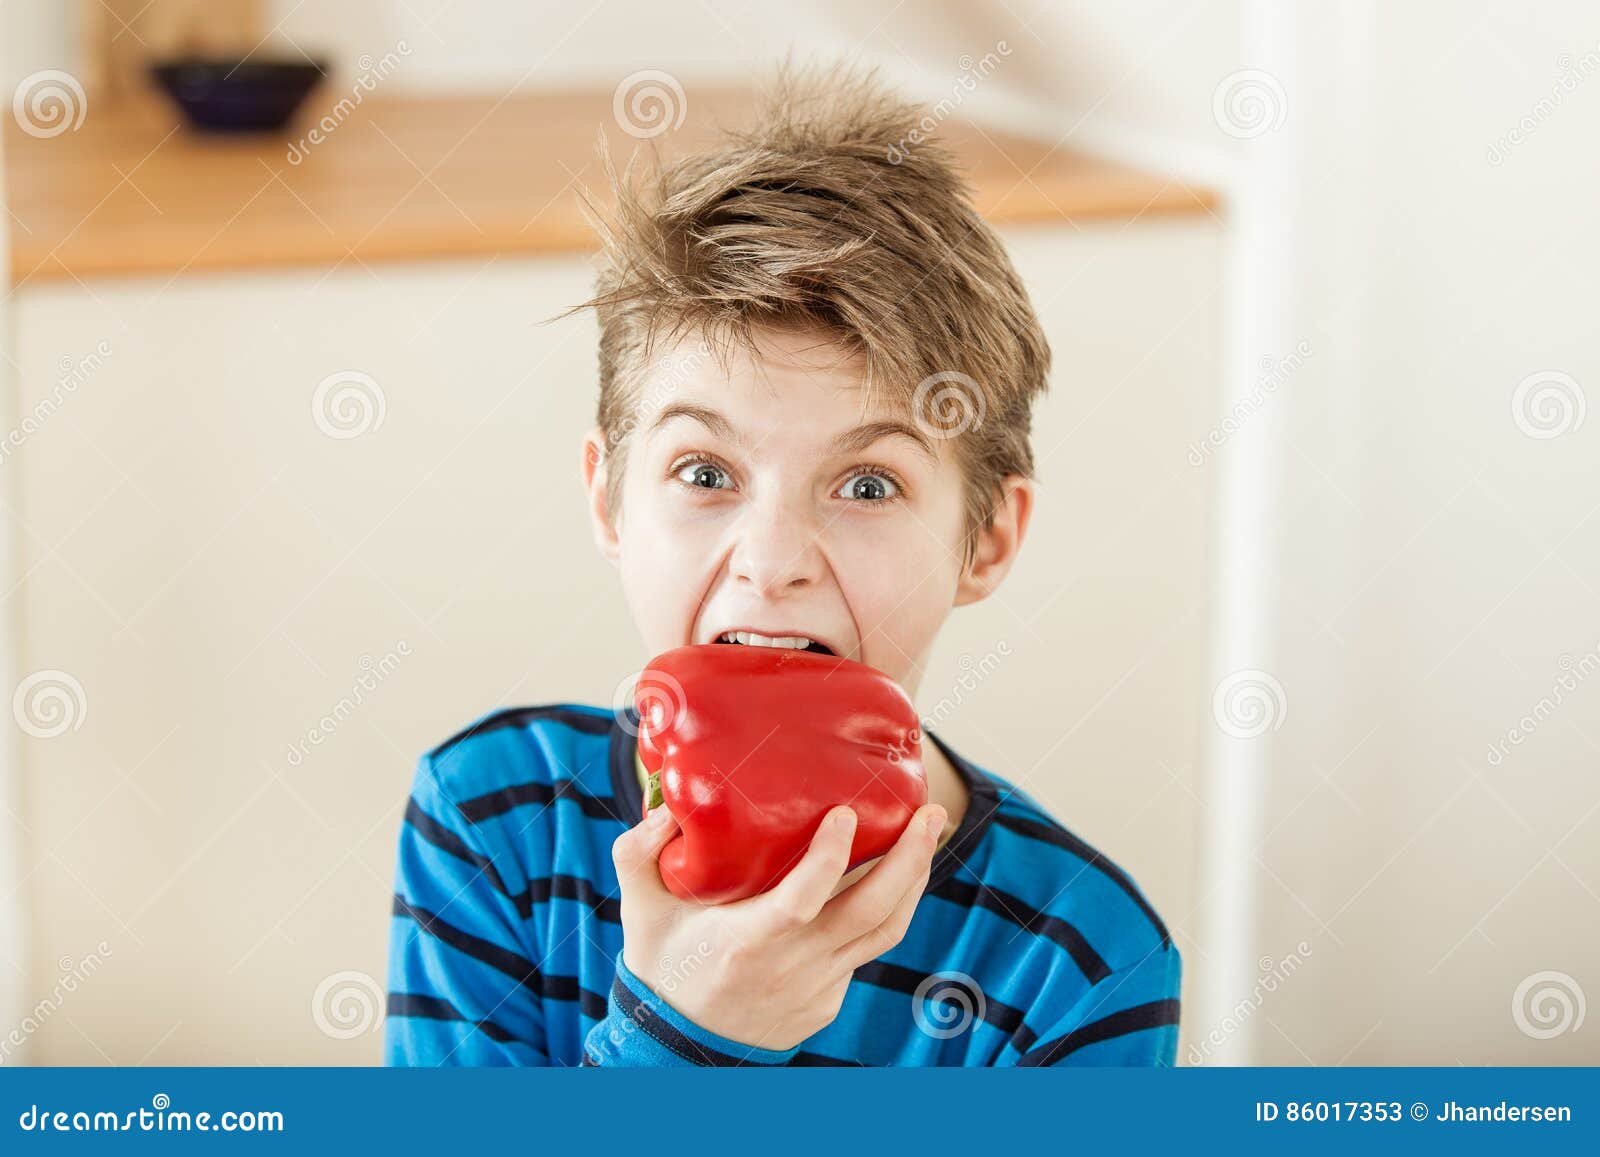 Surprised Young Boy Biting into a Red Bell Pepper Stock Image - Image of mouth, eating: 86017353